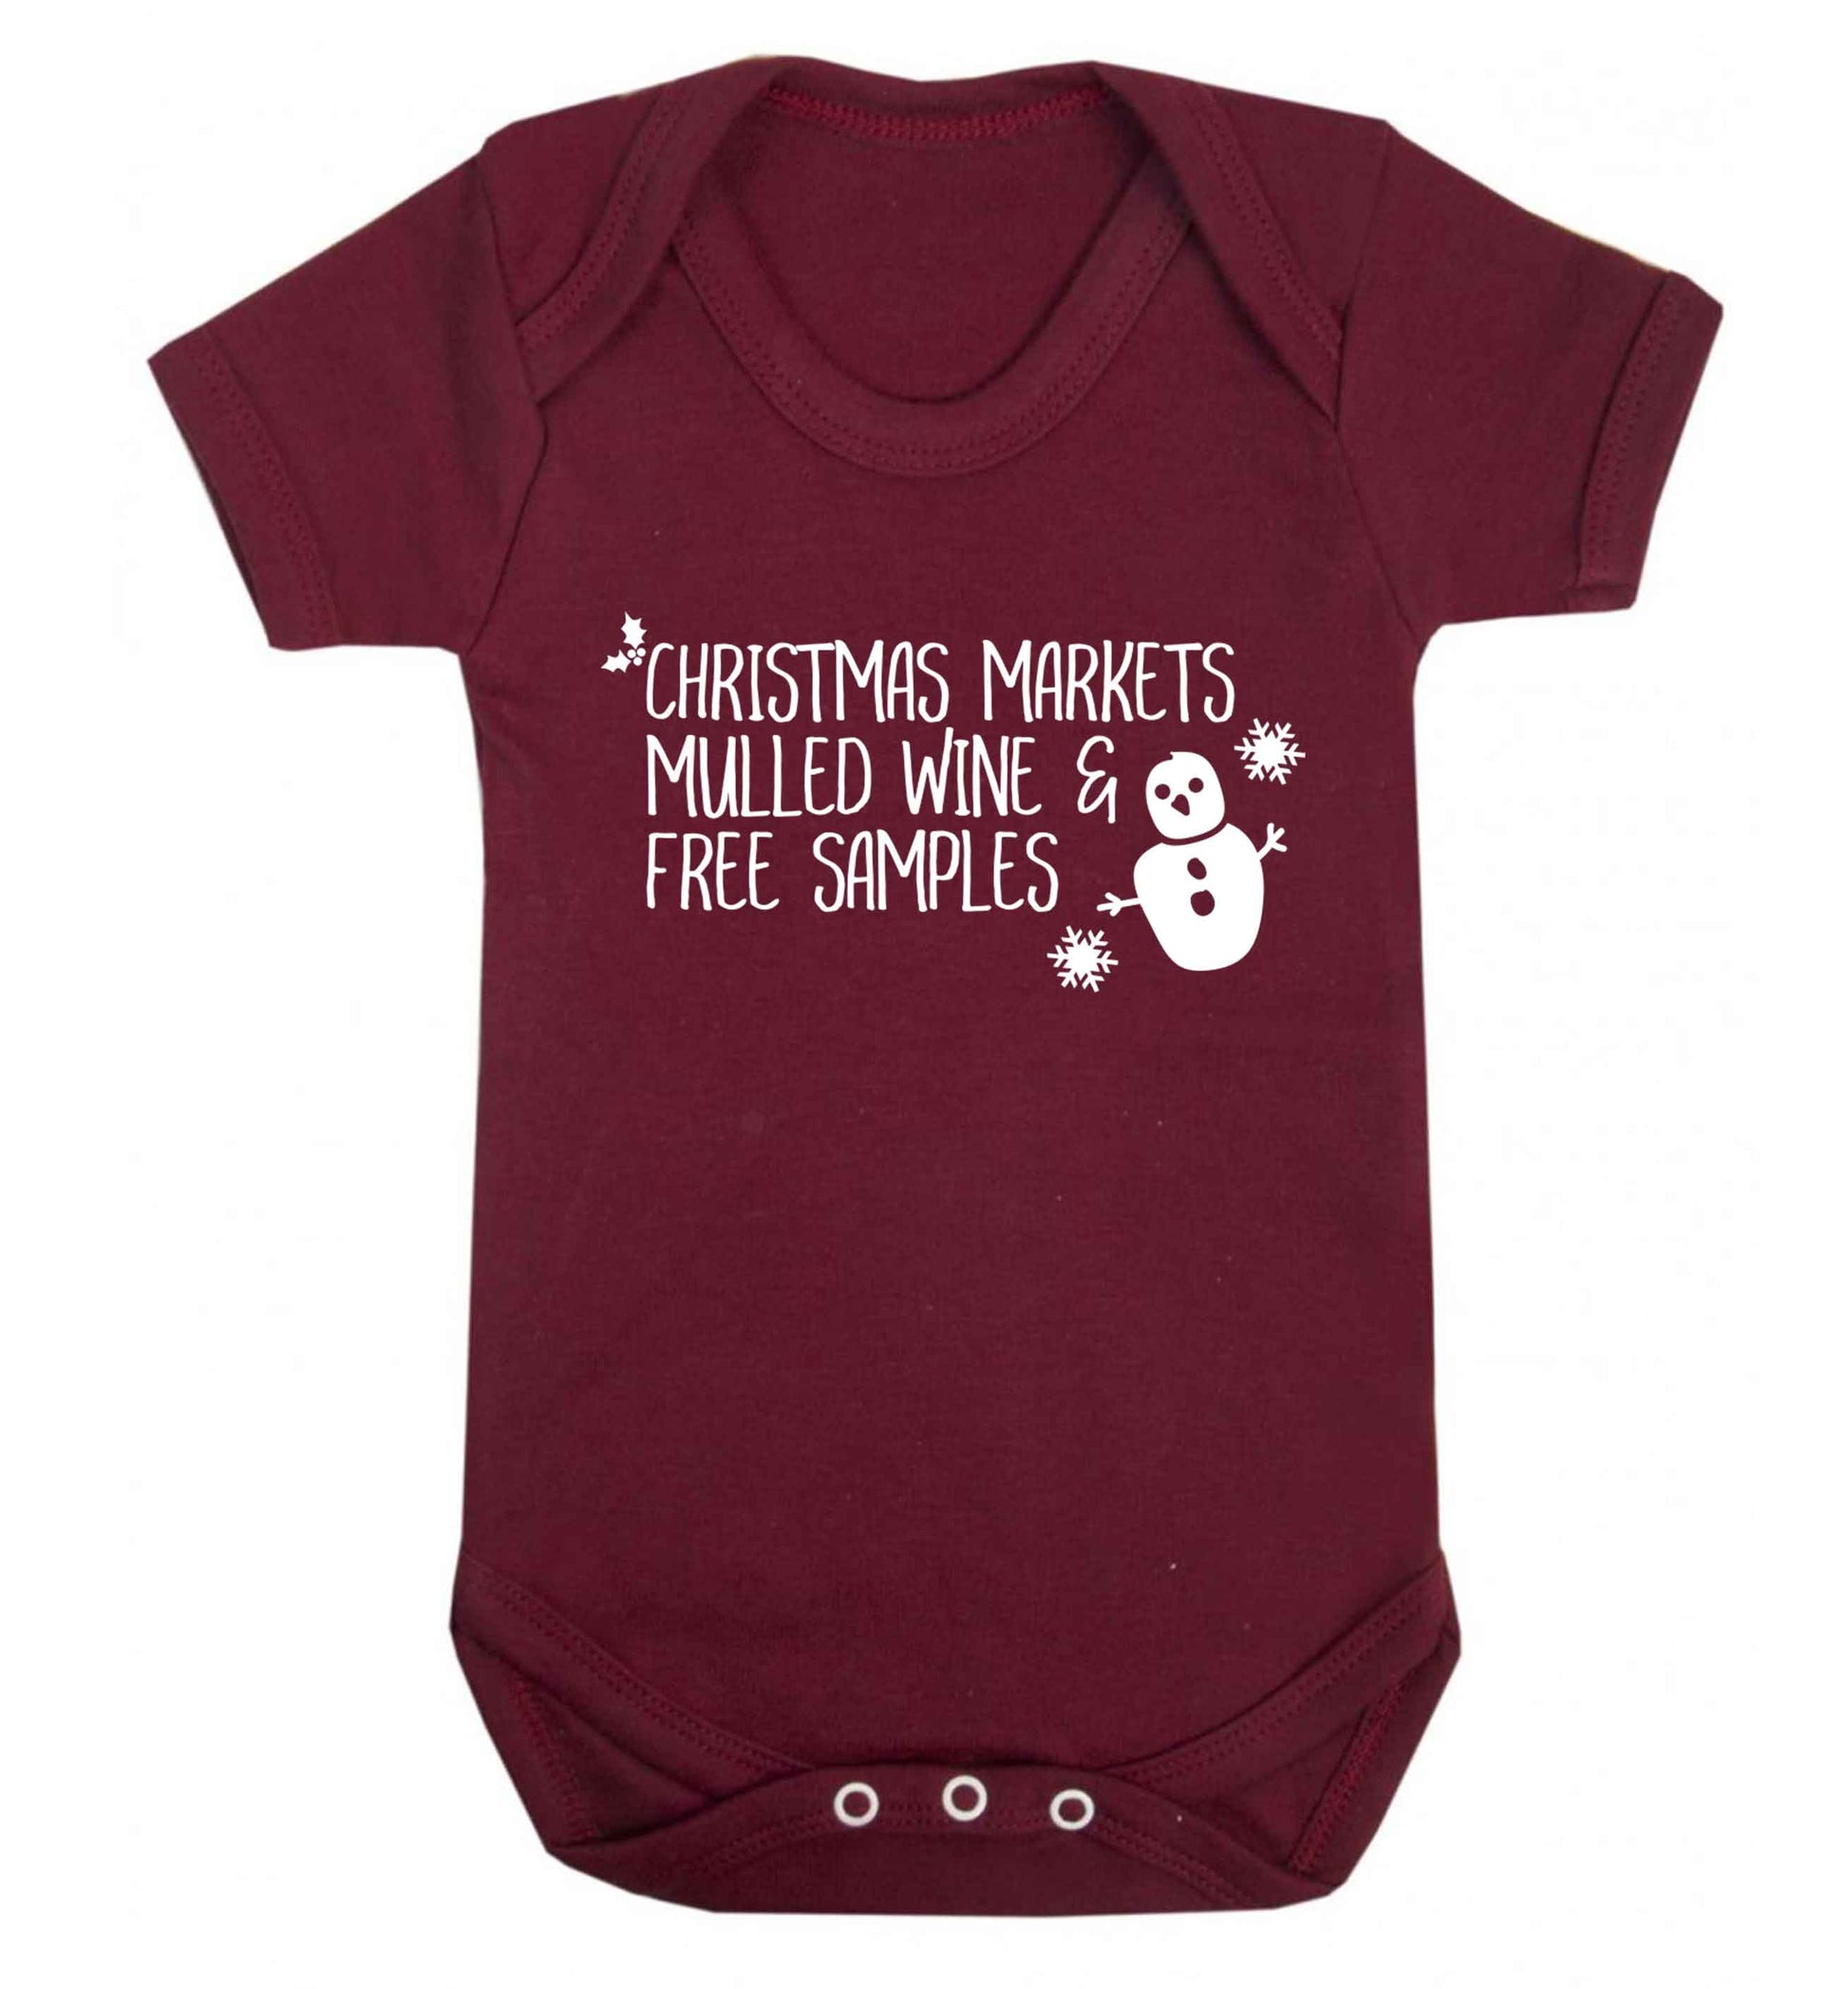 Christmas market mulled wine & free samples Baby Vest maroon 18-24 months